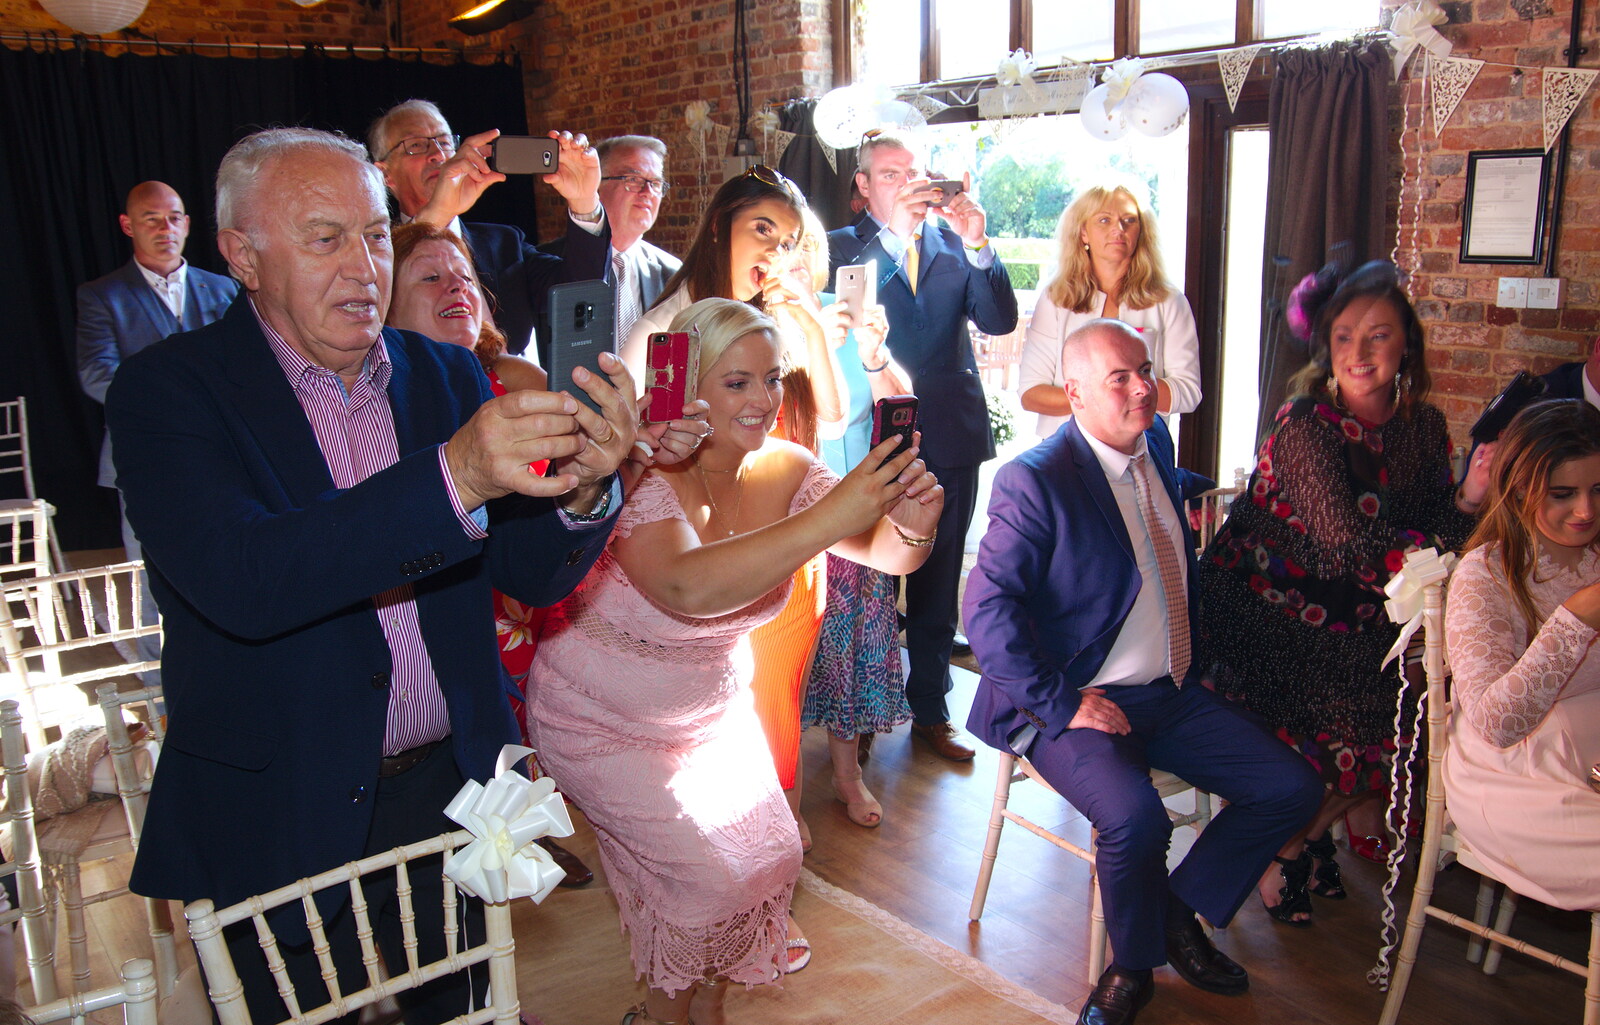 It's a full-on paparazzi moment from Neil and Martina's Wedding, The Three Tuns, Bransgore, Dorset - 20th September 2019